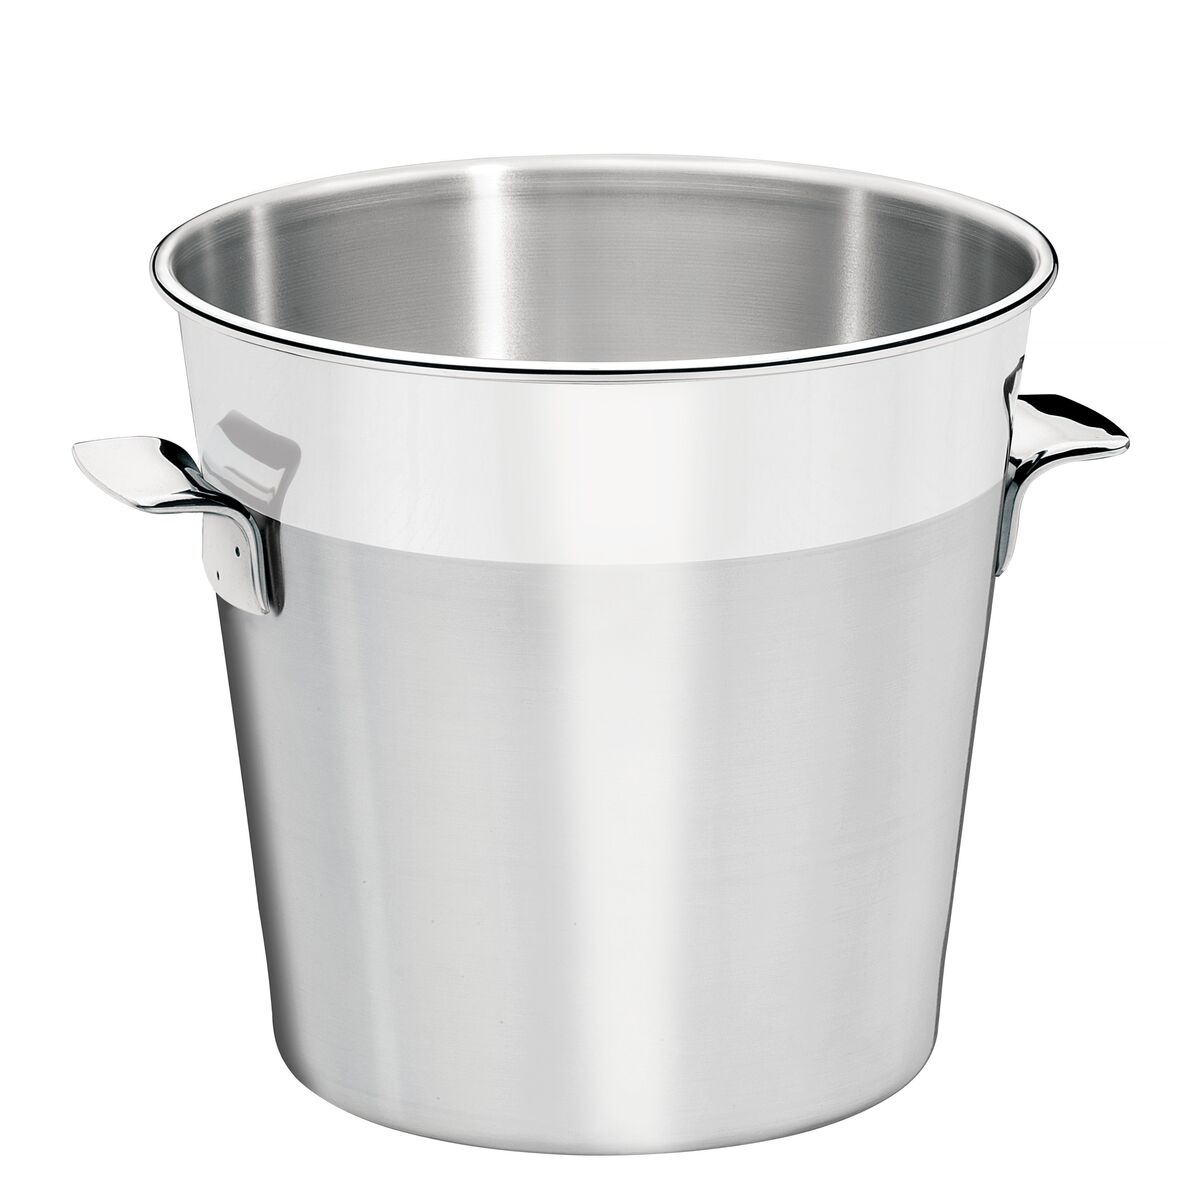 Tramontina Cosmos matte stainless steel ice bucket with shiny rim, 14 cm and 1.8 L